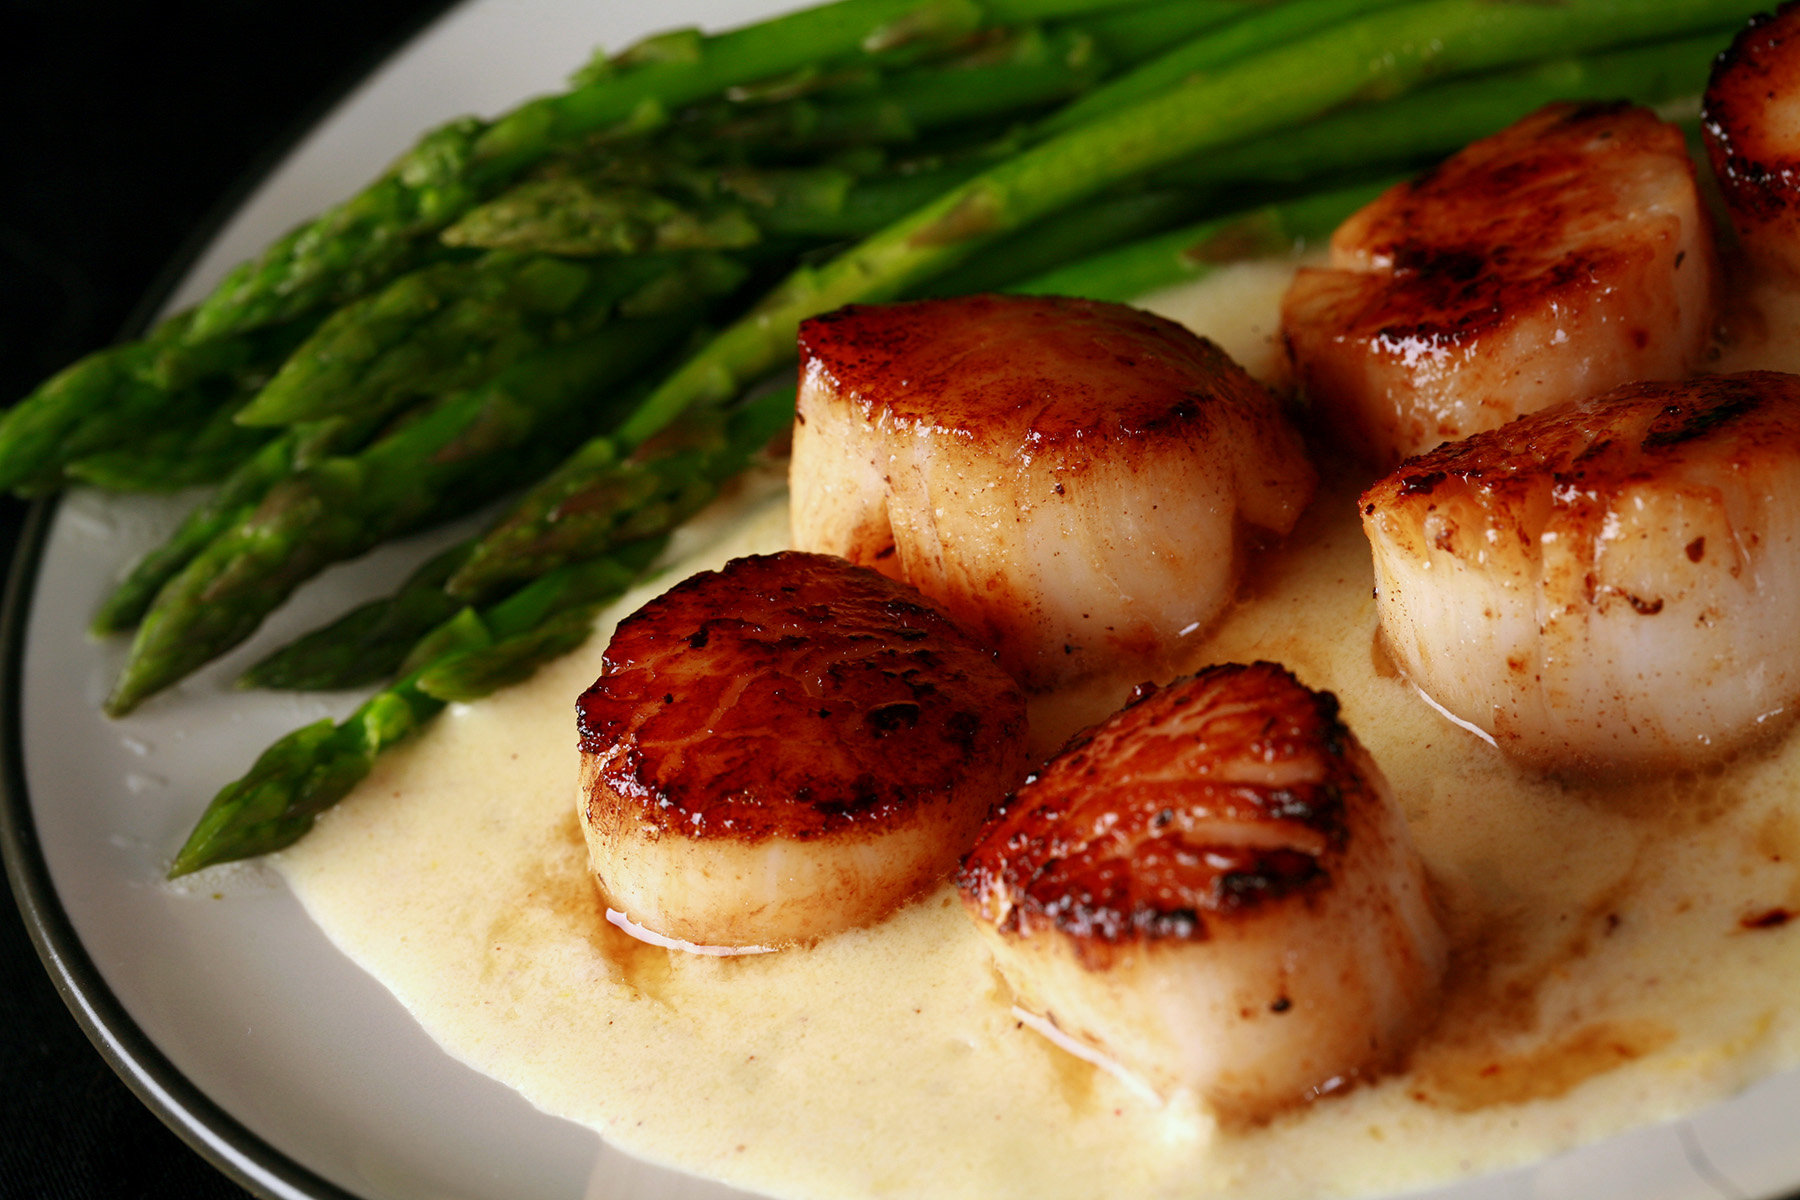 A plate with a Dijon wine sauce underneath several seared scallops. There is asparagus on the side.